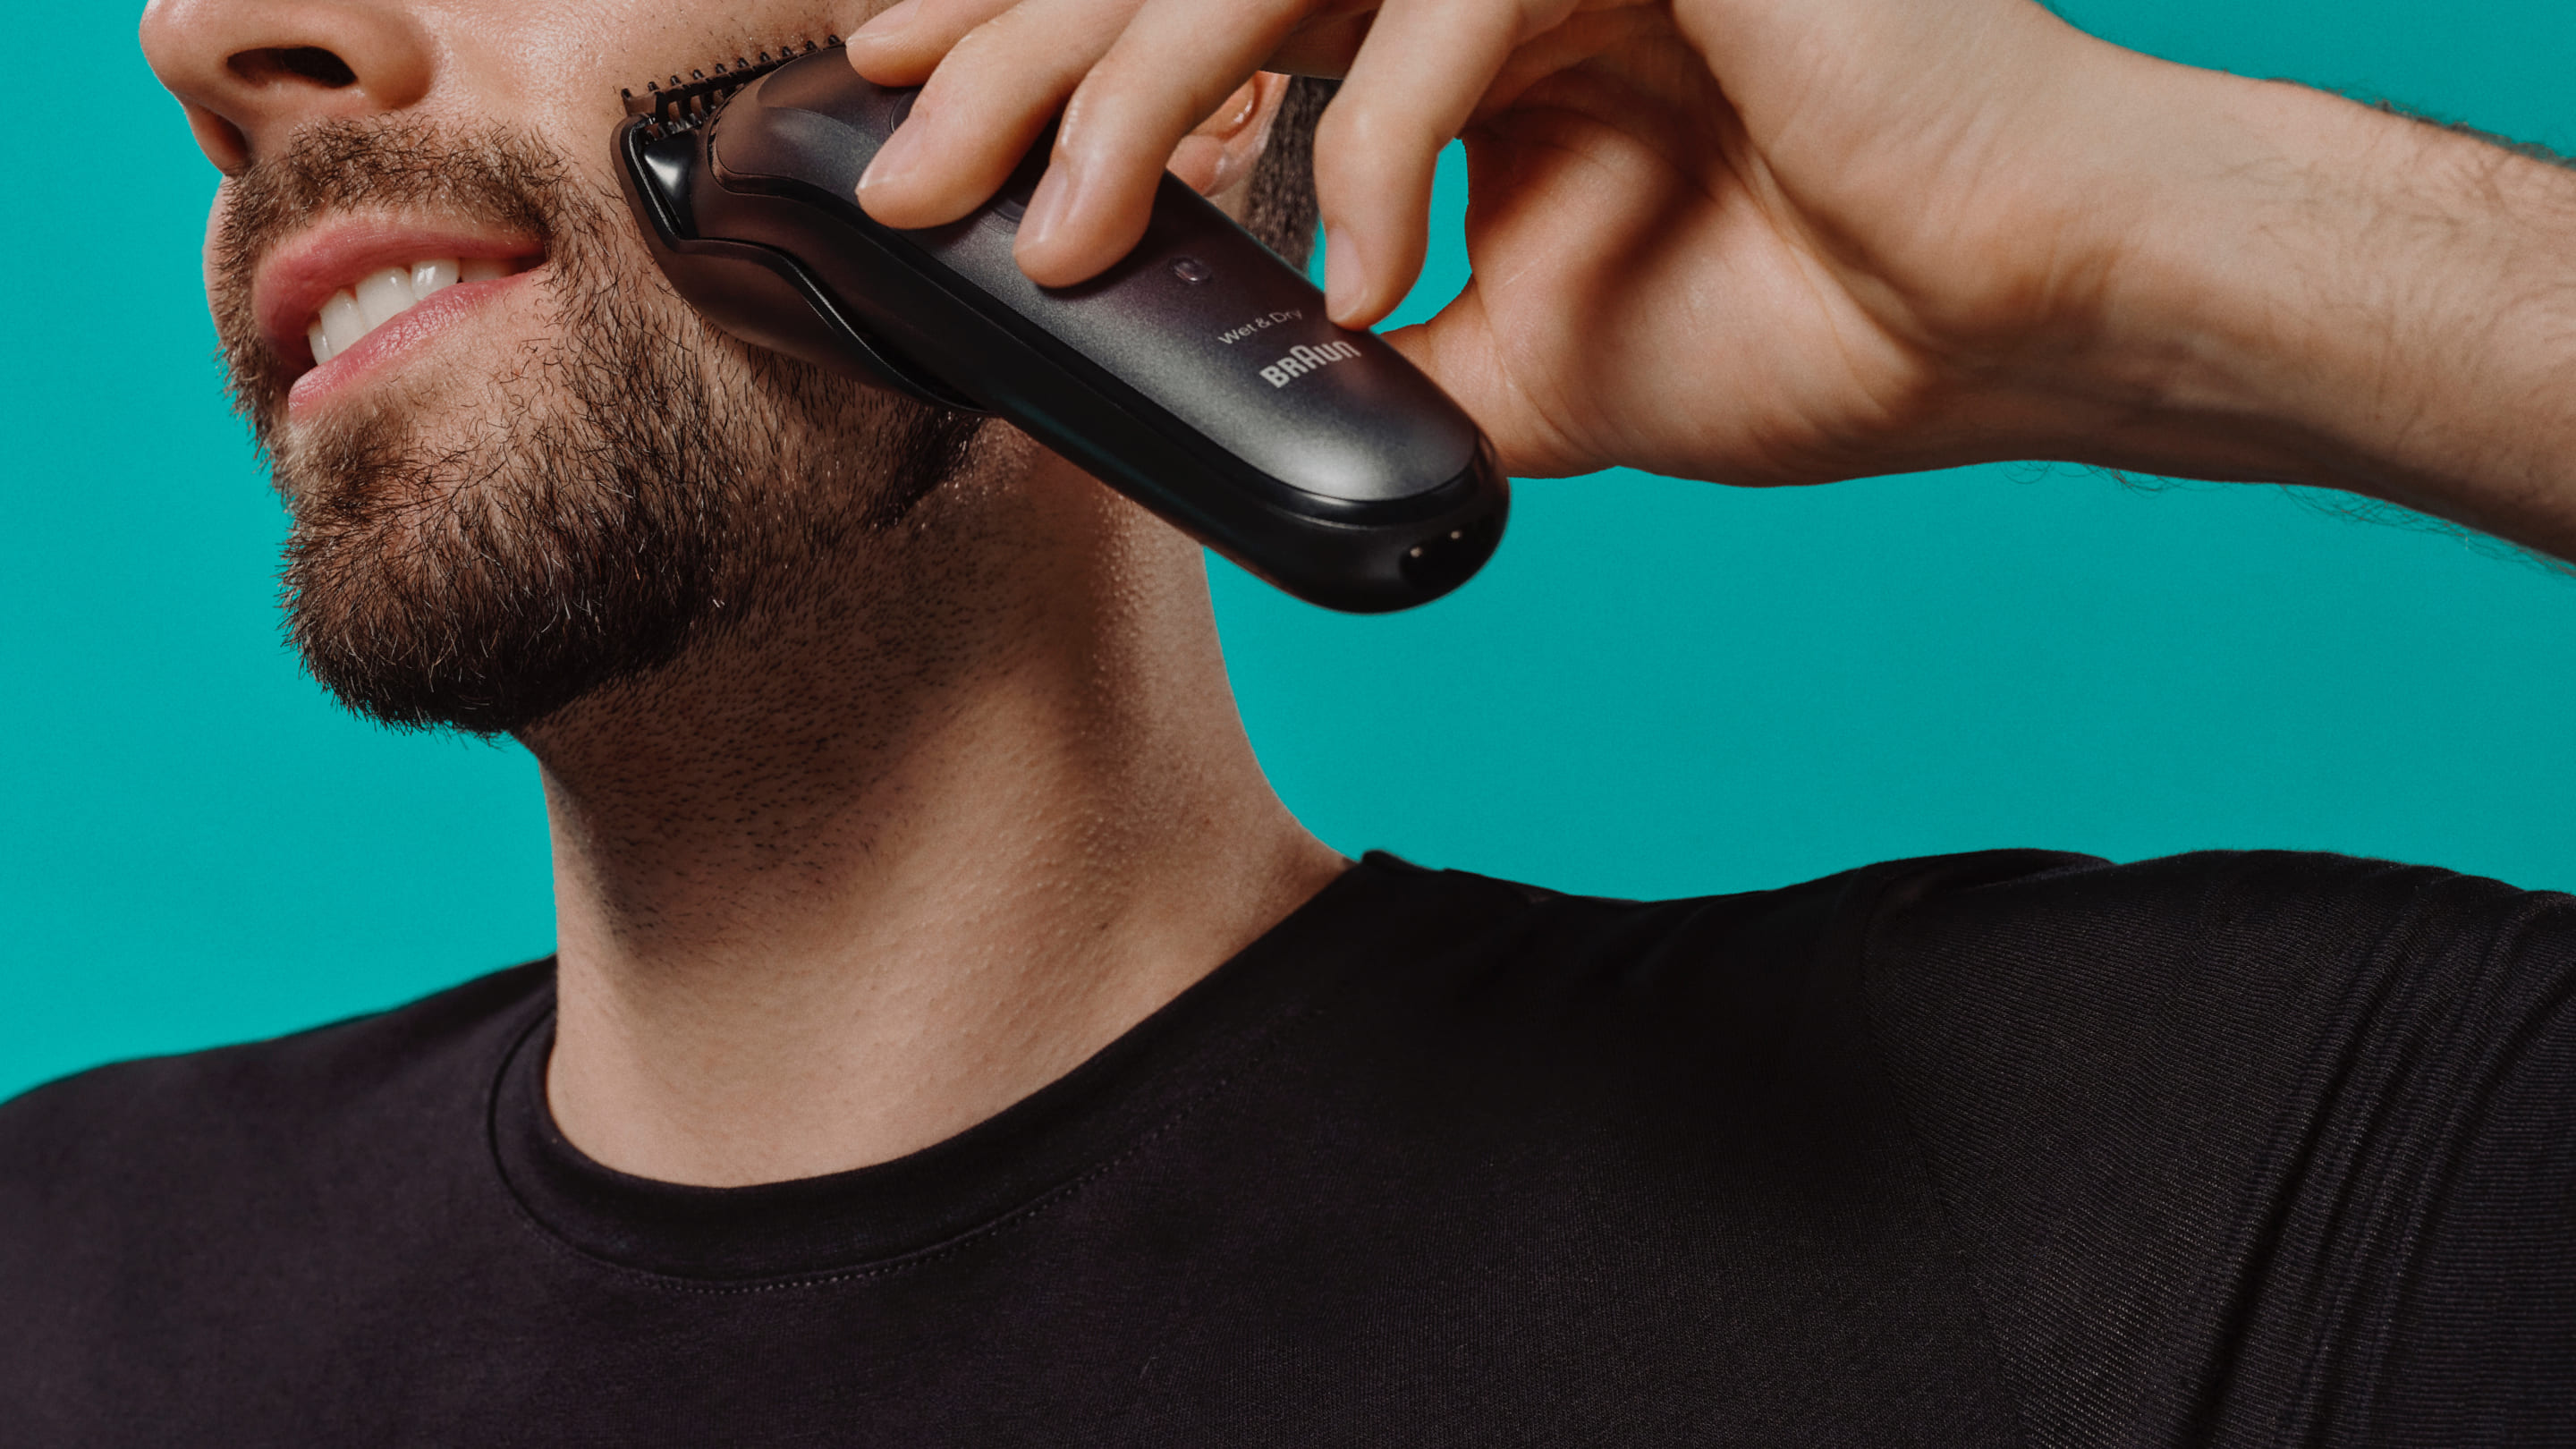 Braun All in one trimmer For Male Grooming | Braun Nordics